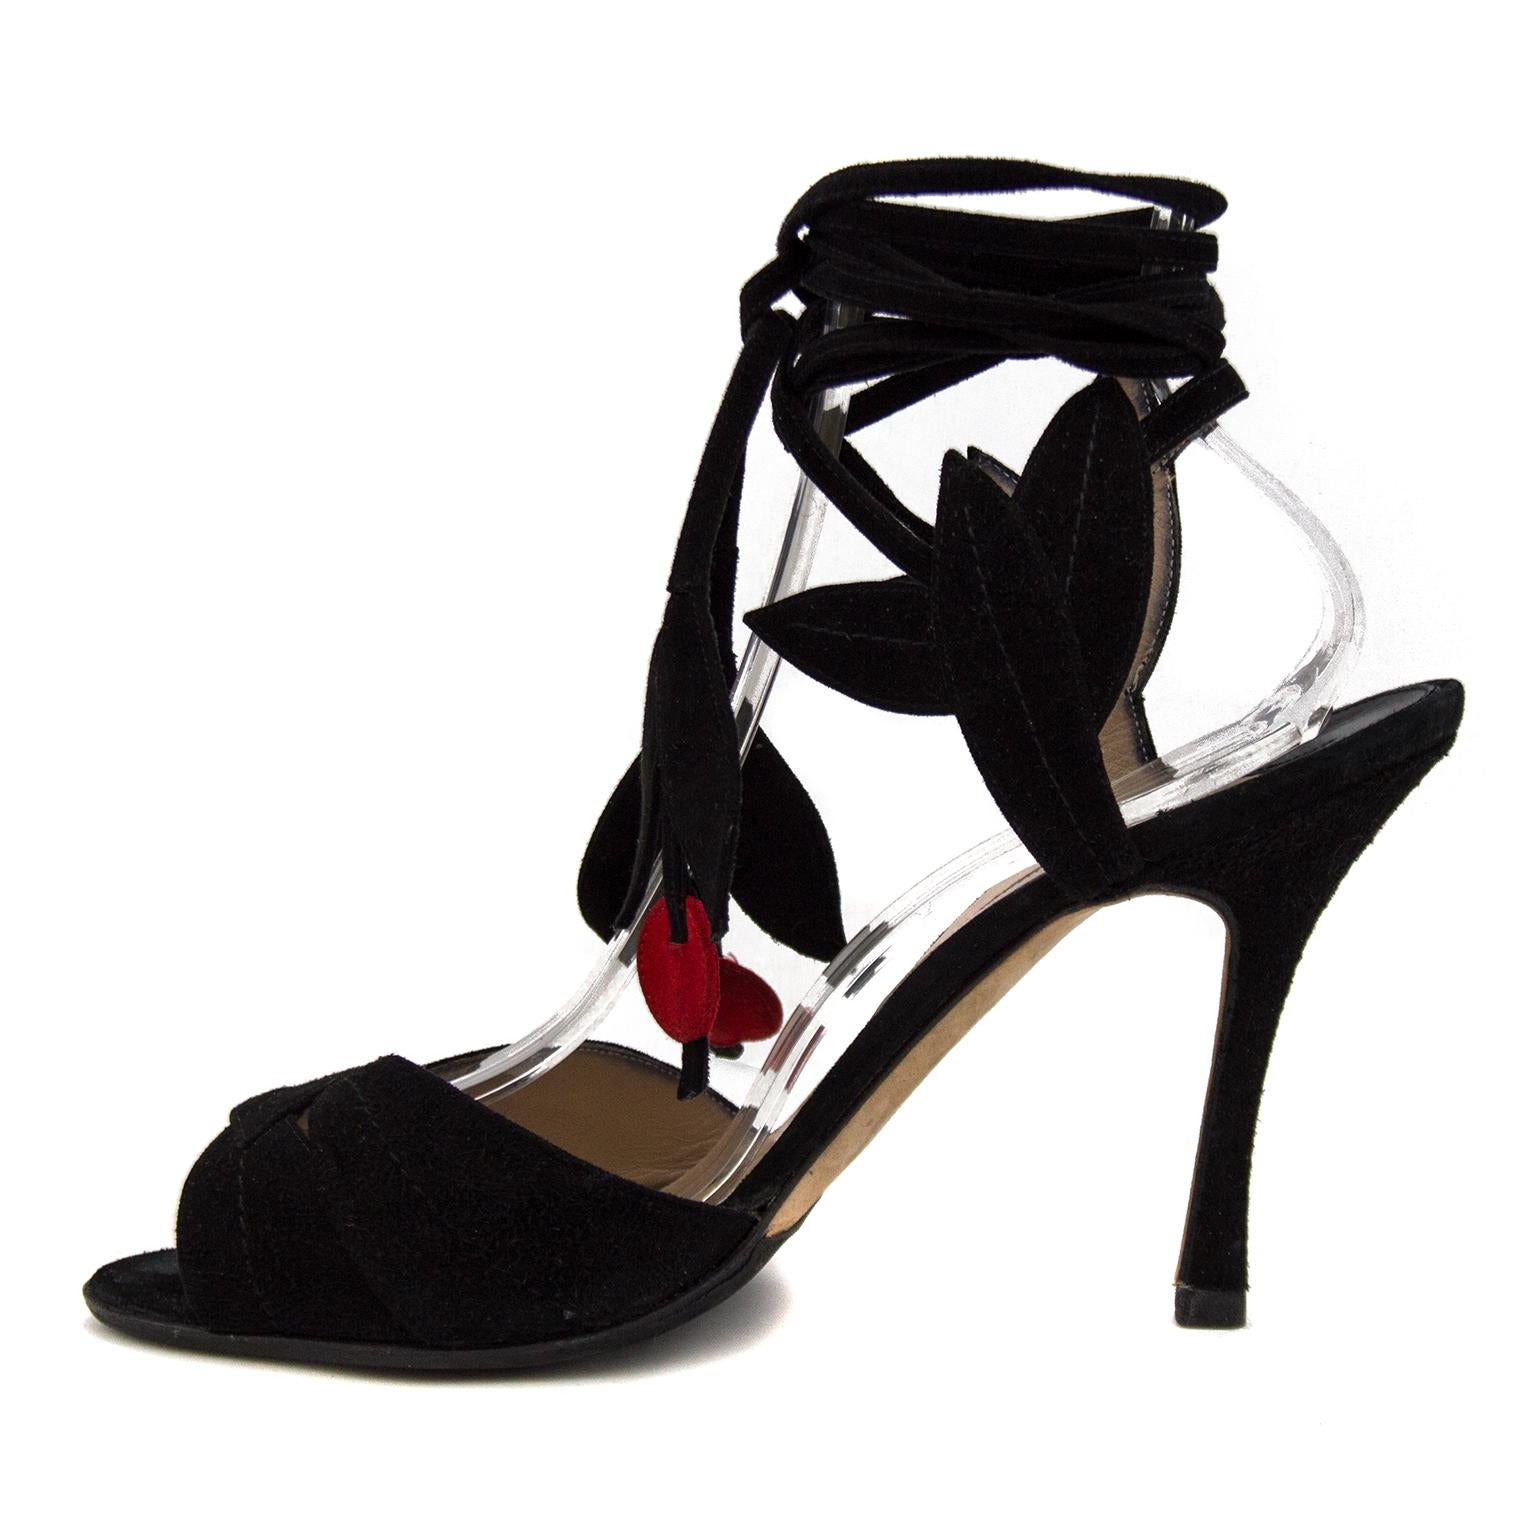  A truly whimsical shoe, this black suede sandal was originally created for Ossie Clark’s catwalk show by Manolo Blahnik in 1971. This was shortly before Blahnik opened his first boutique in London in 1973. The shoe was re-made for the Victoria &